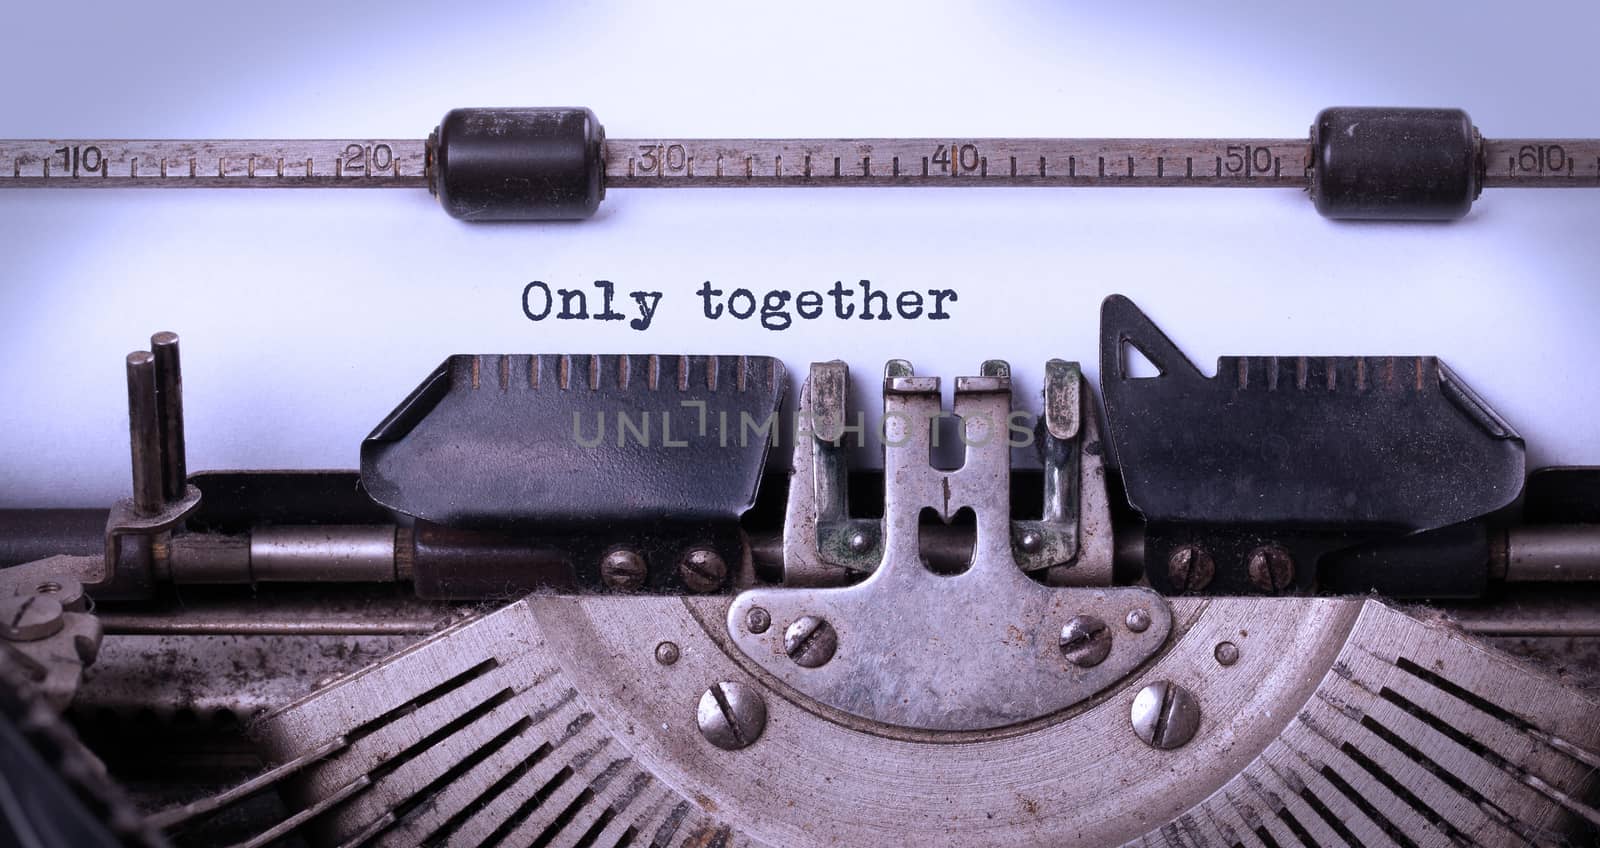 Only together, written on an old typewriter by michaklootwijk